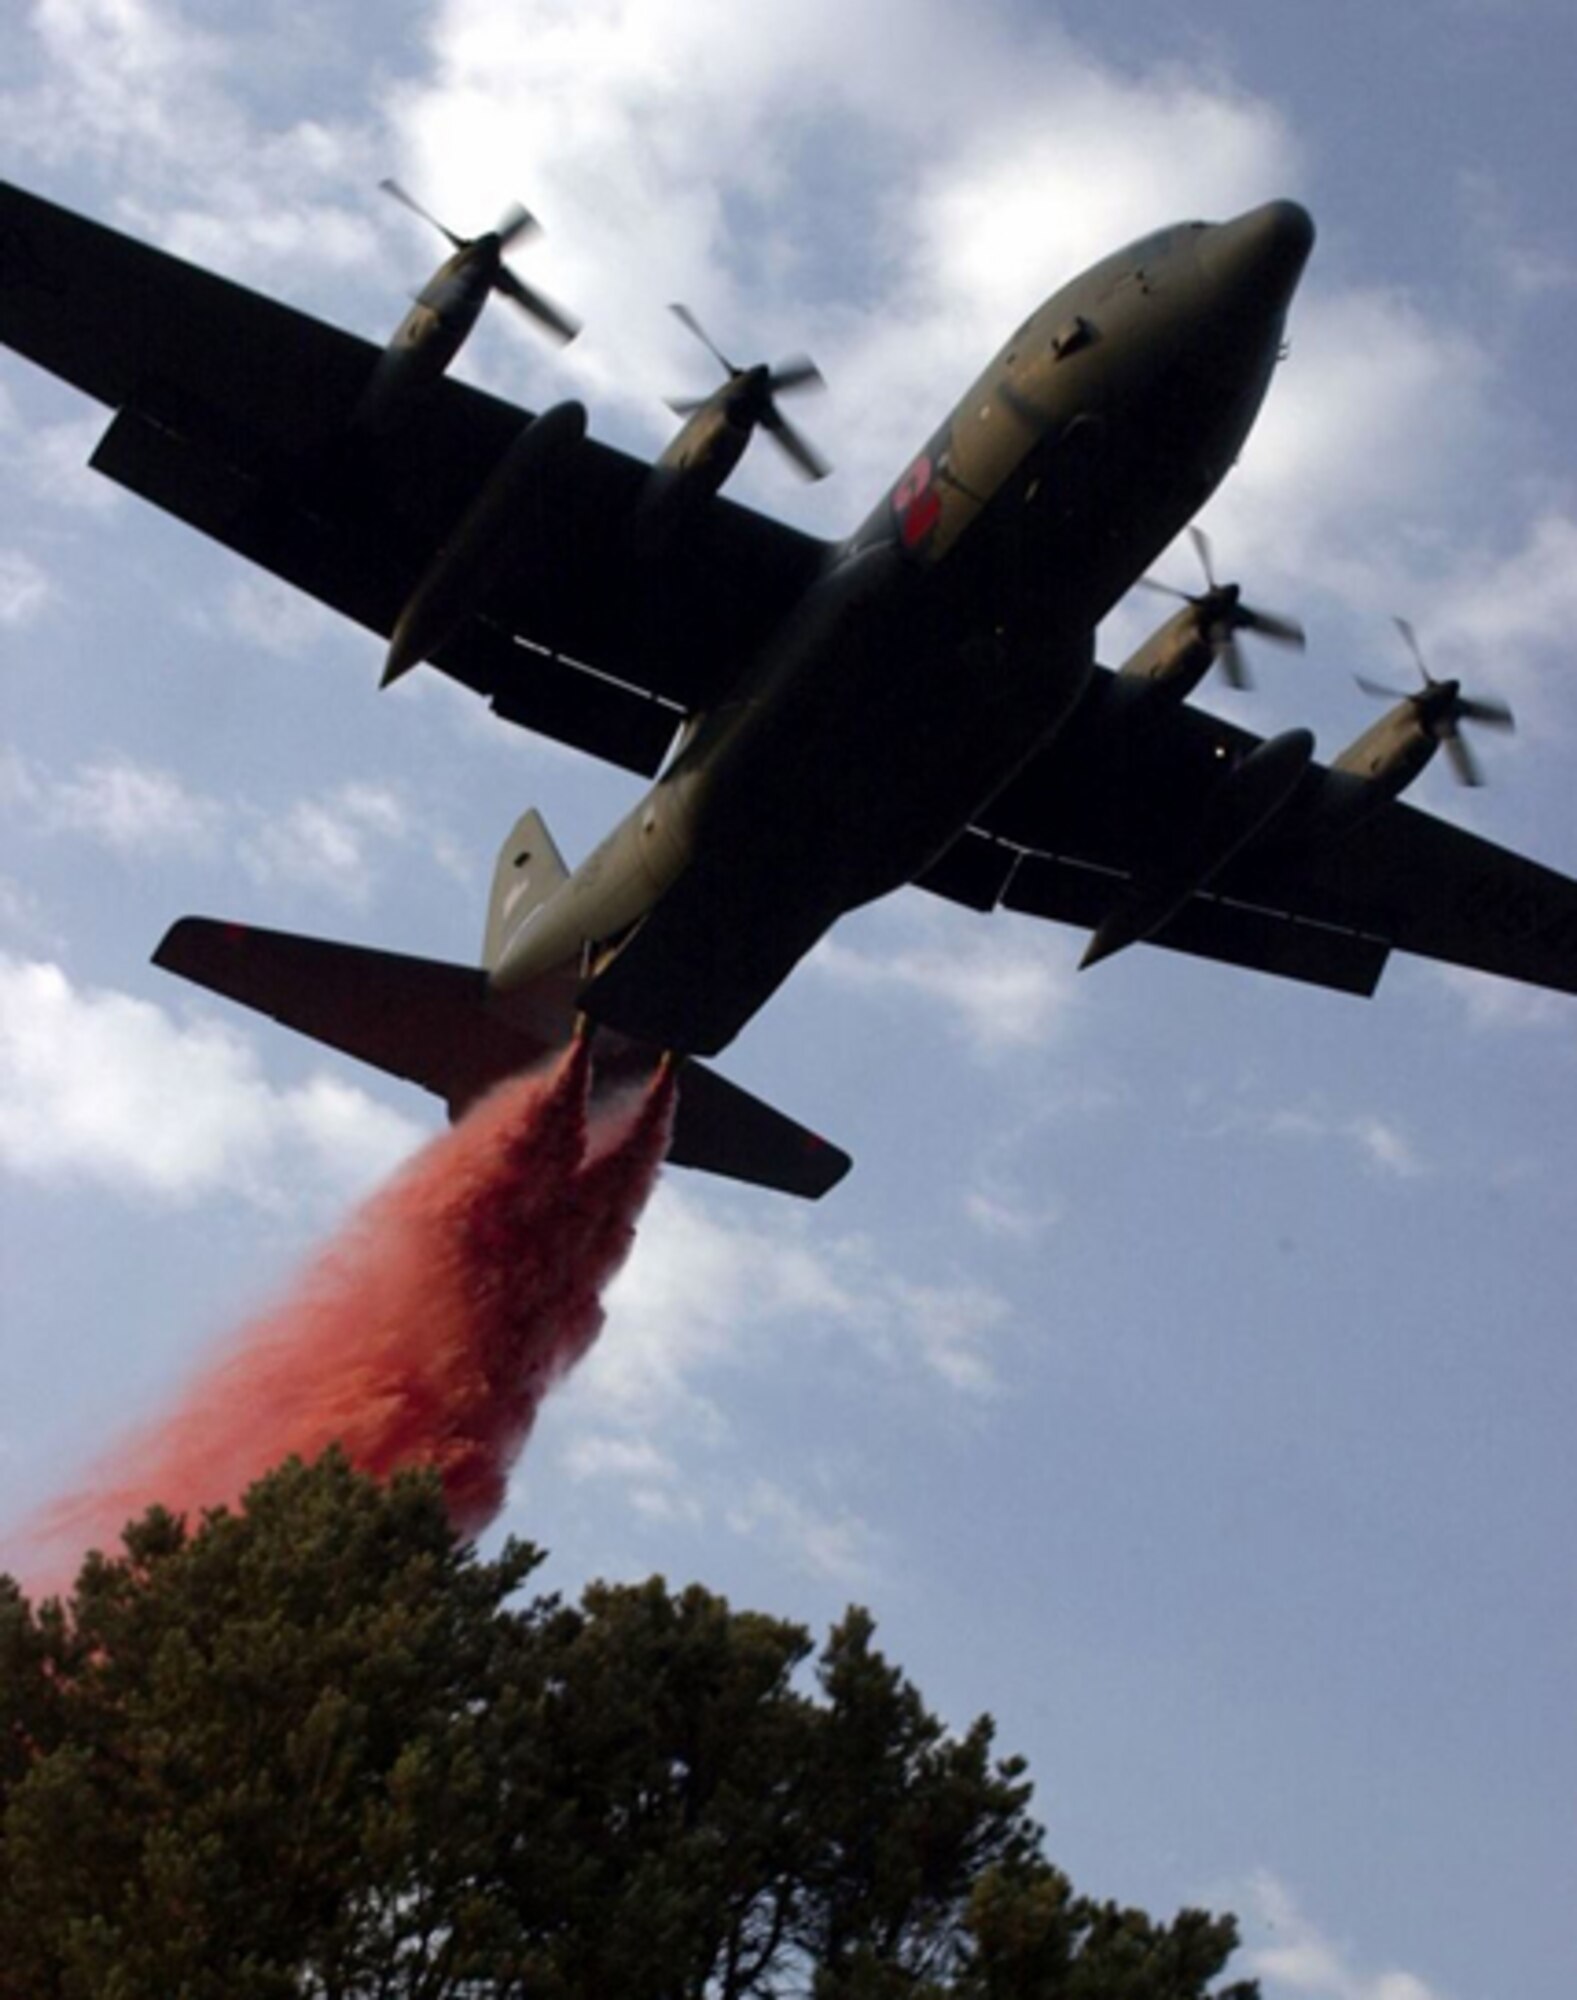 A C-130 uses aerial firefighting equipment known as the Modular Airborne Fire Fighting System to drop red-colored retardant, or ‘slurry’ as it is sometimes called, from the plane into the air over a fire. MAFFS was established by Congress in the early 1970s to create a national response system to better fight major fires. (U.S. Air Force Photo)